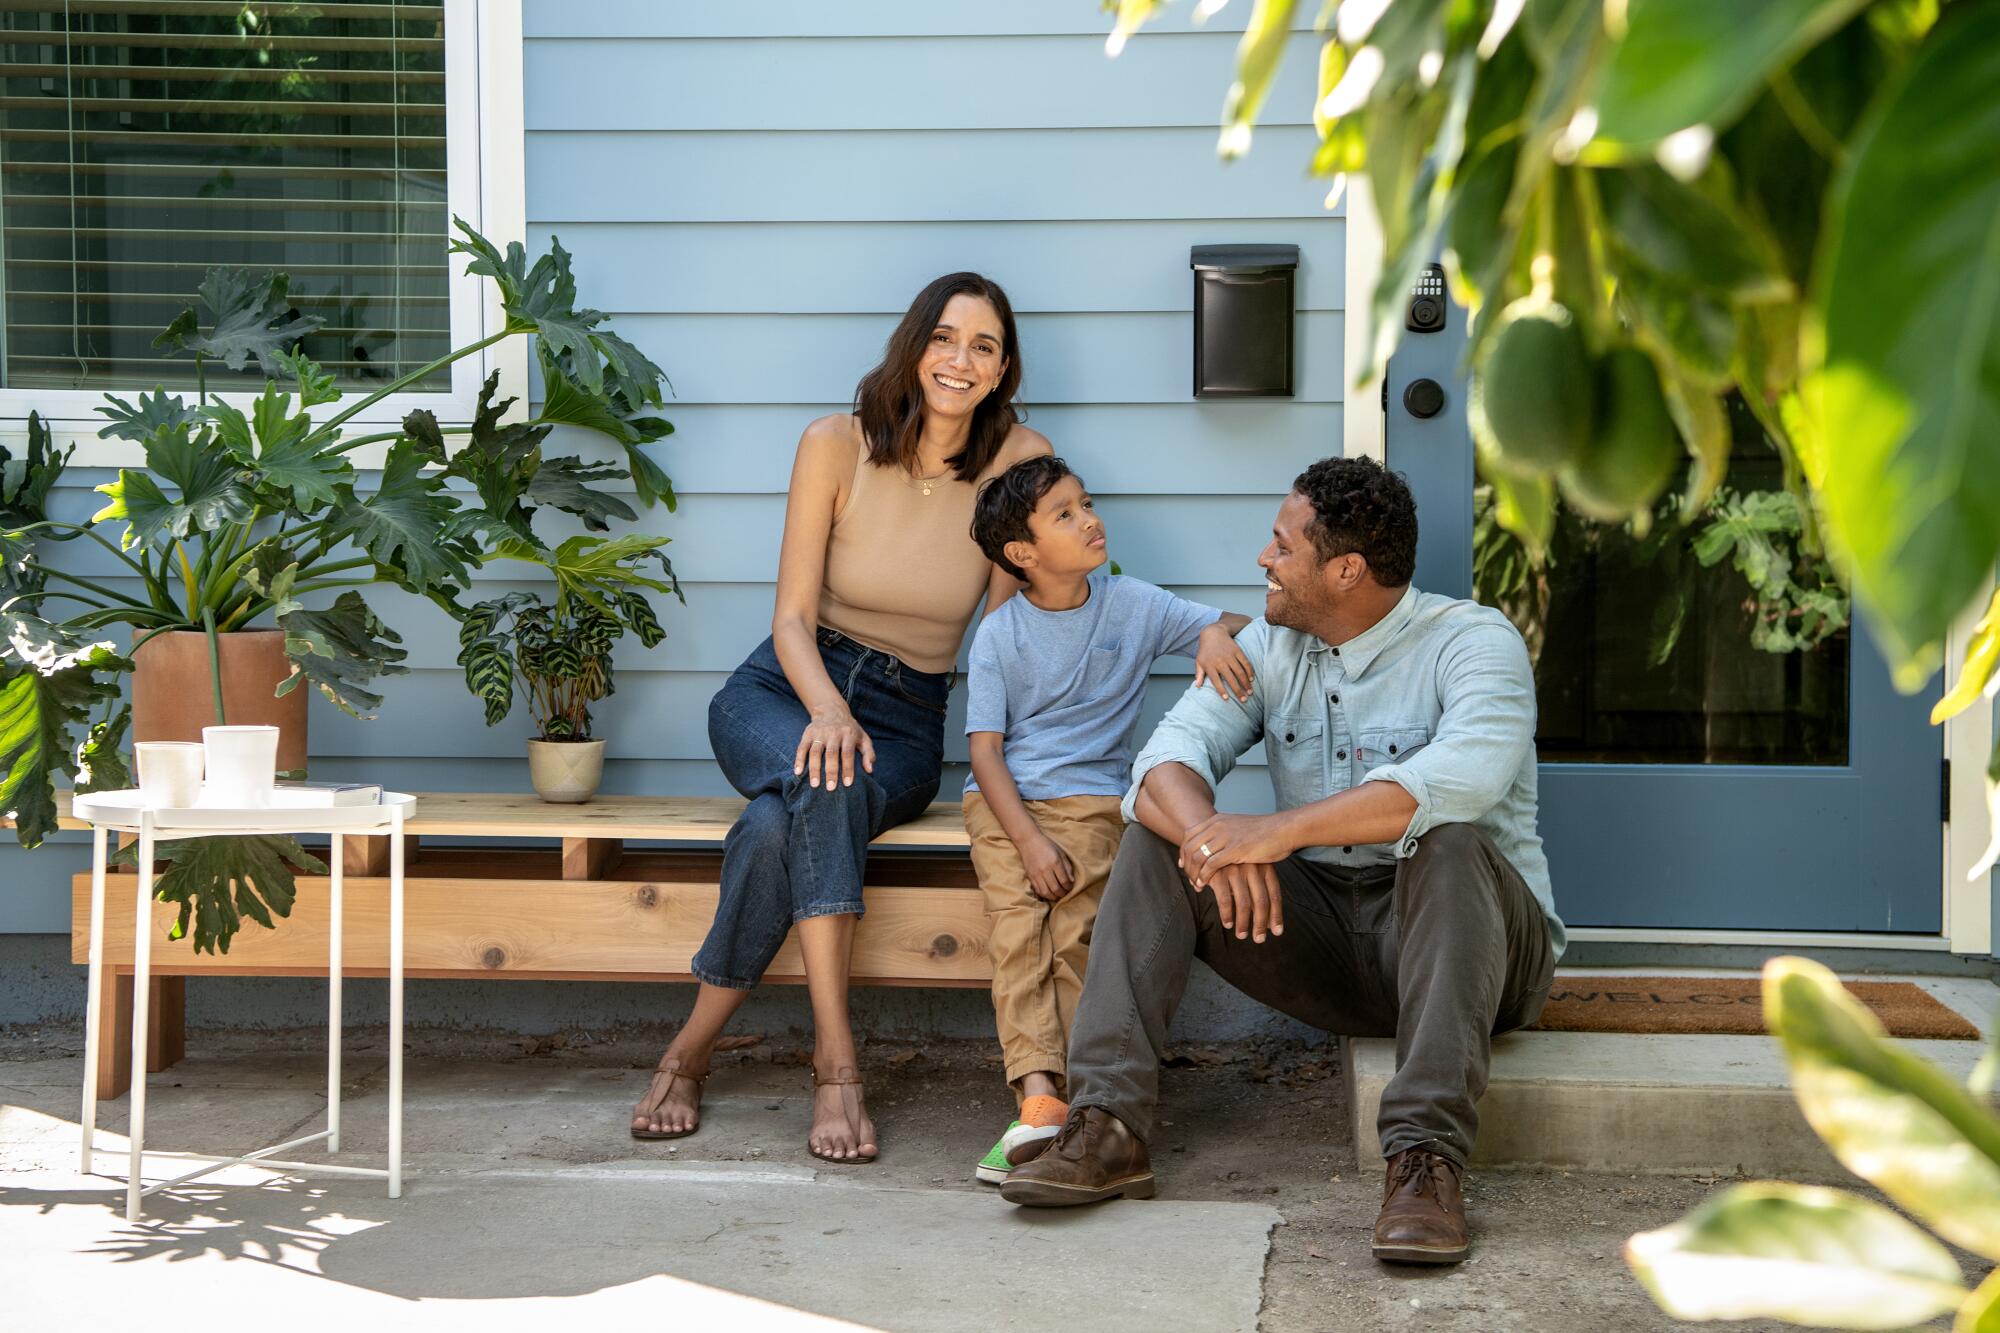 A woman, boy and man sit amid potted plants outside a house with blue clapboard siding 